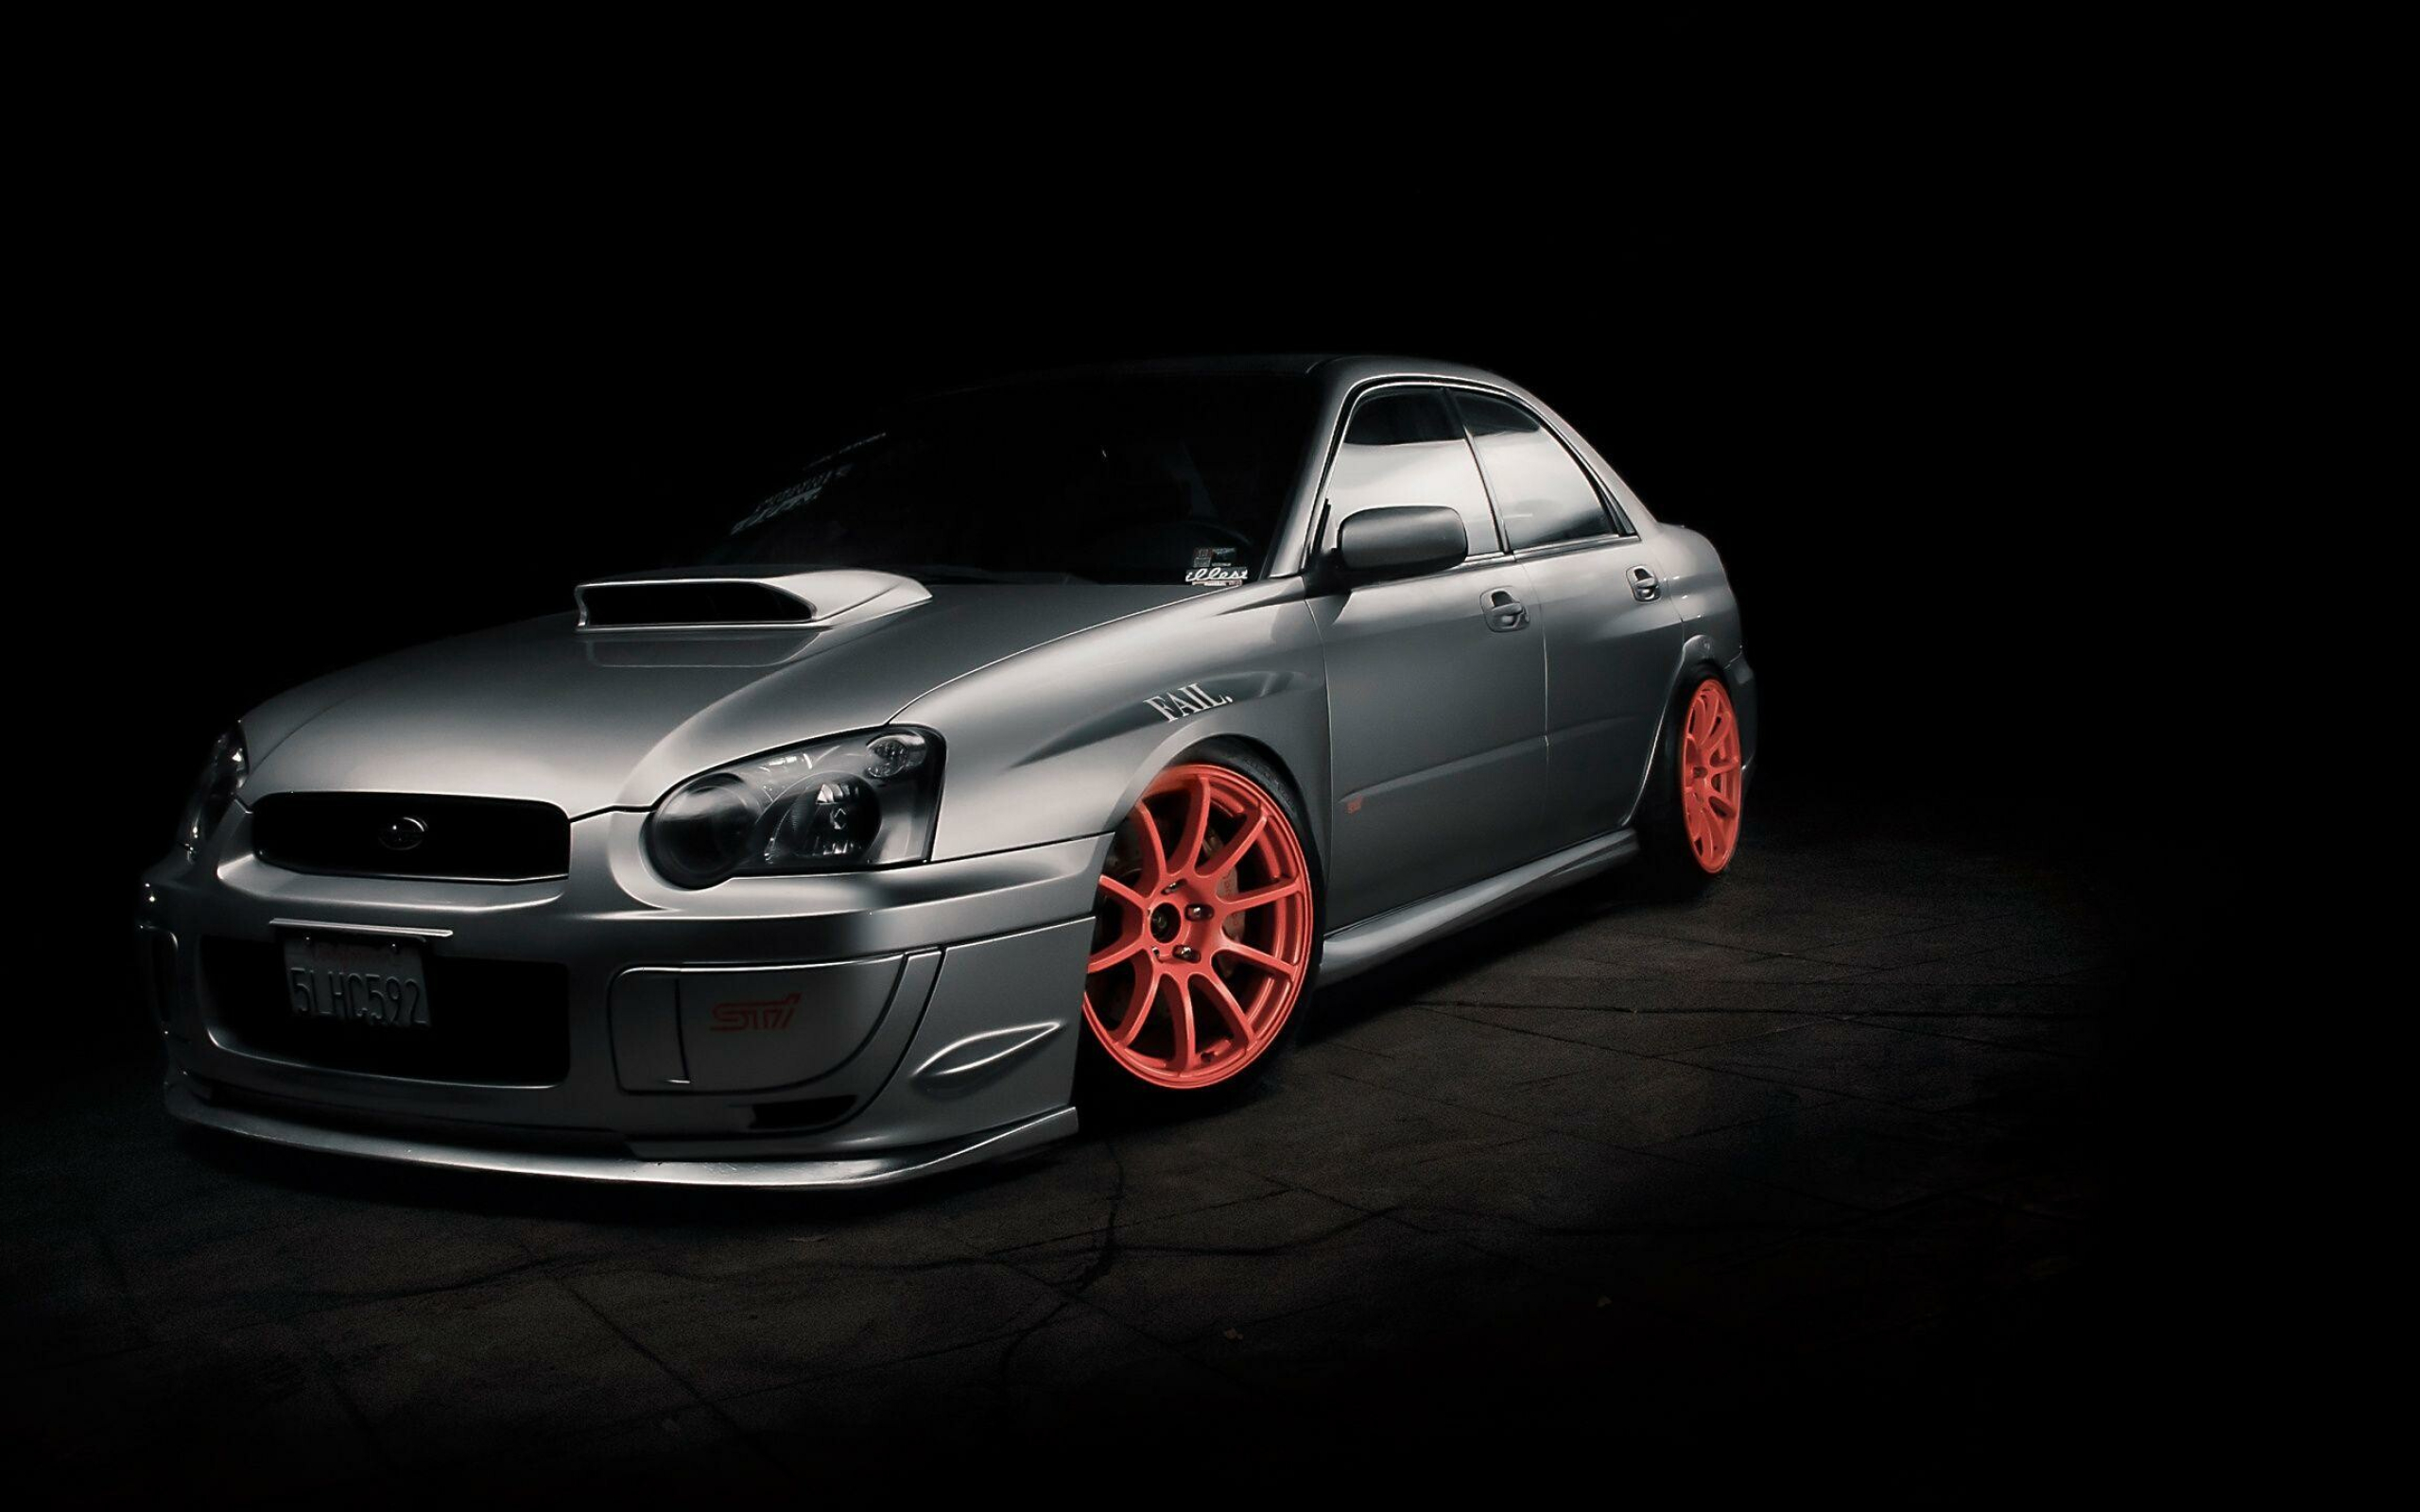 Subaru: 2004, Impreza, 4-door sedan, The line-up that ranges from sporty to outrageous to practical. 2560x1600 HD Background.